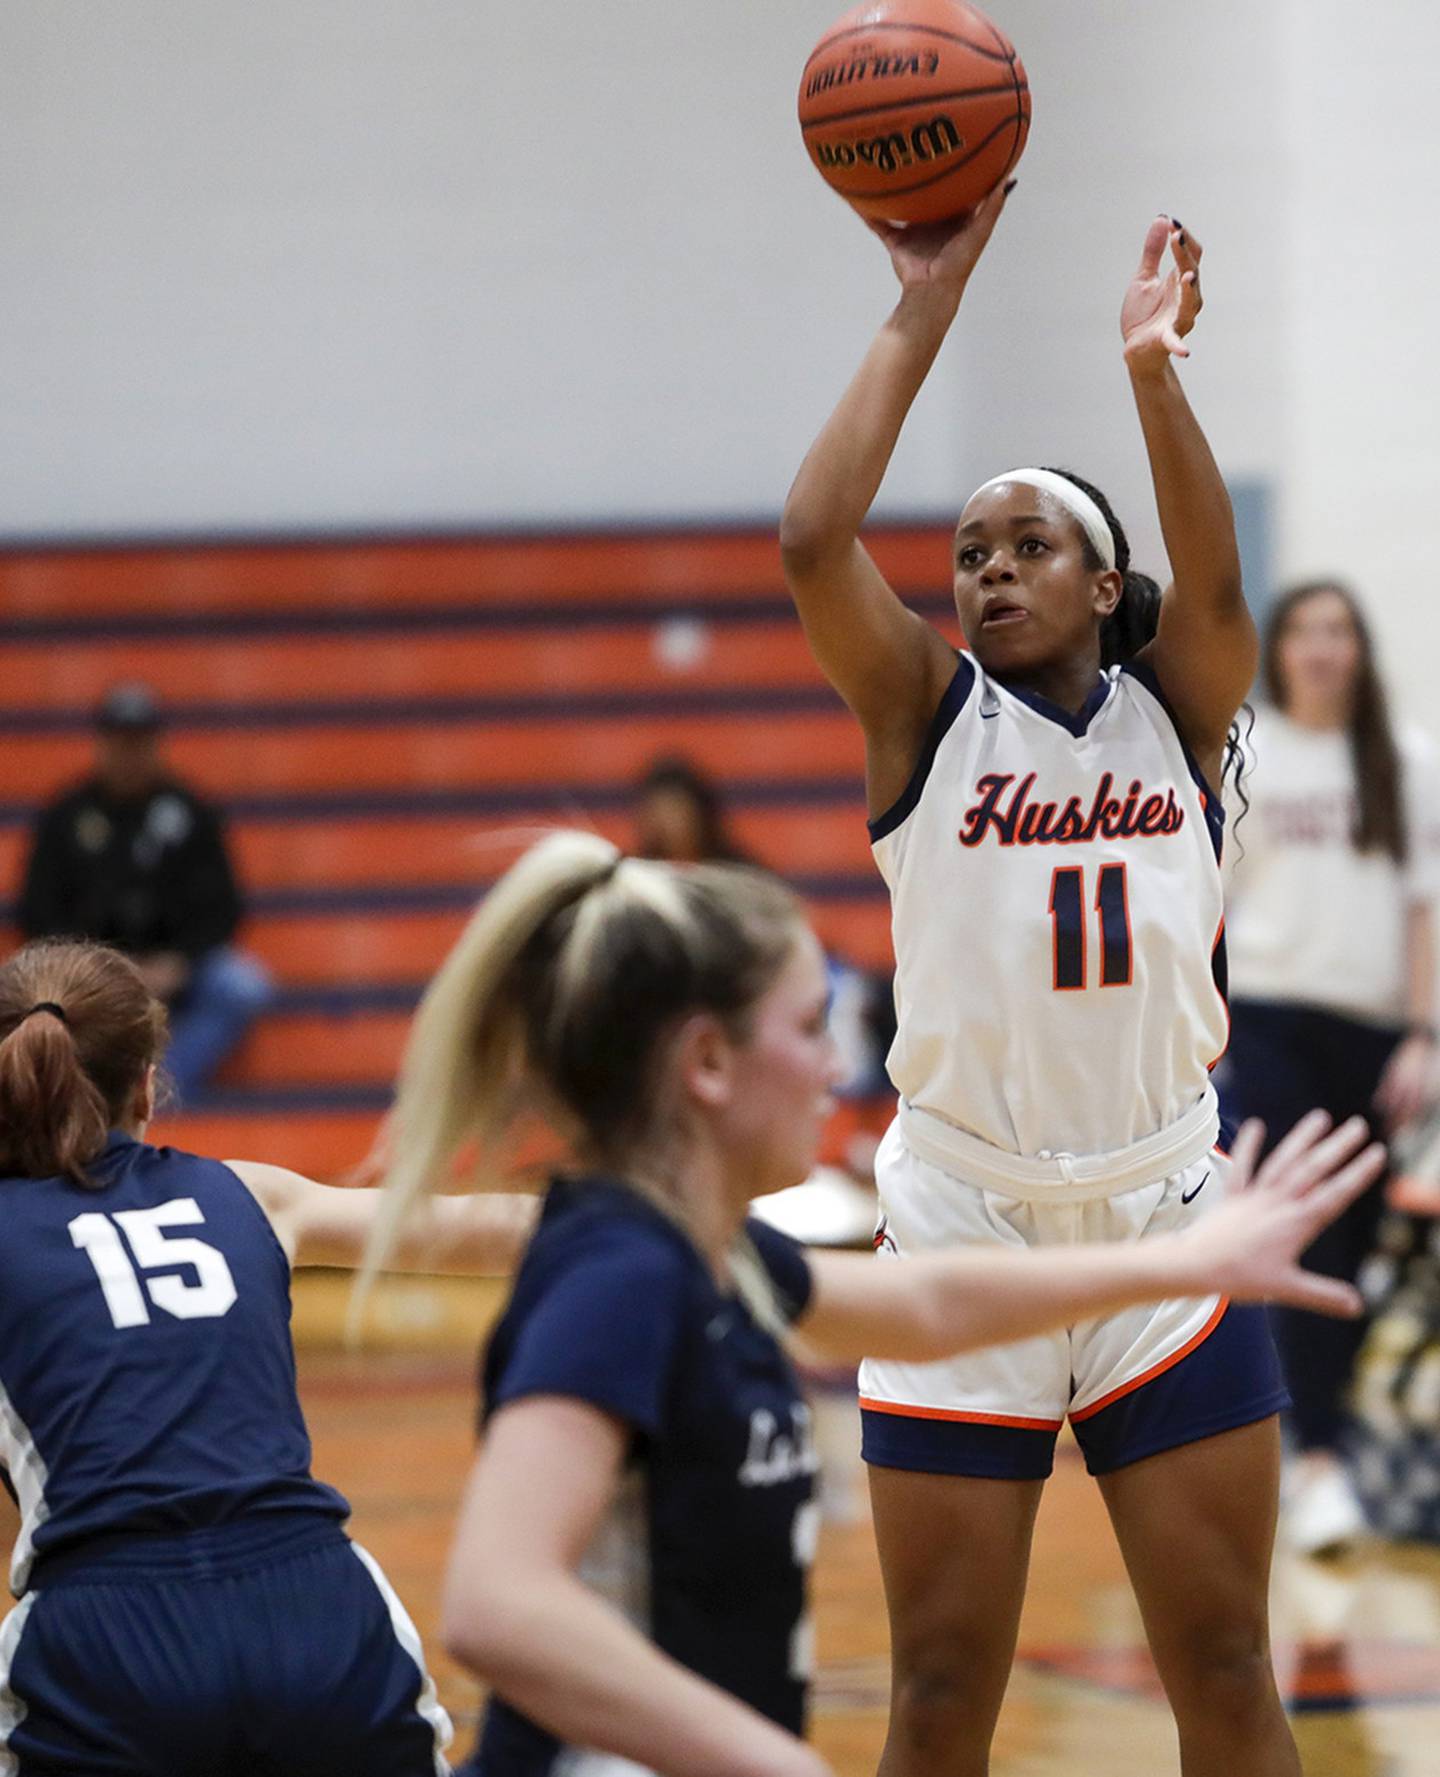 Naperville North’s Layla Henderson (11) puts up a shot against La Lumiere’s Lila Sirko (15) during a game in Naperville on Tuesday, Dec. 6, 2022.